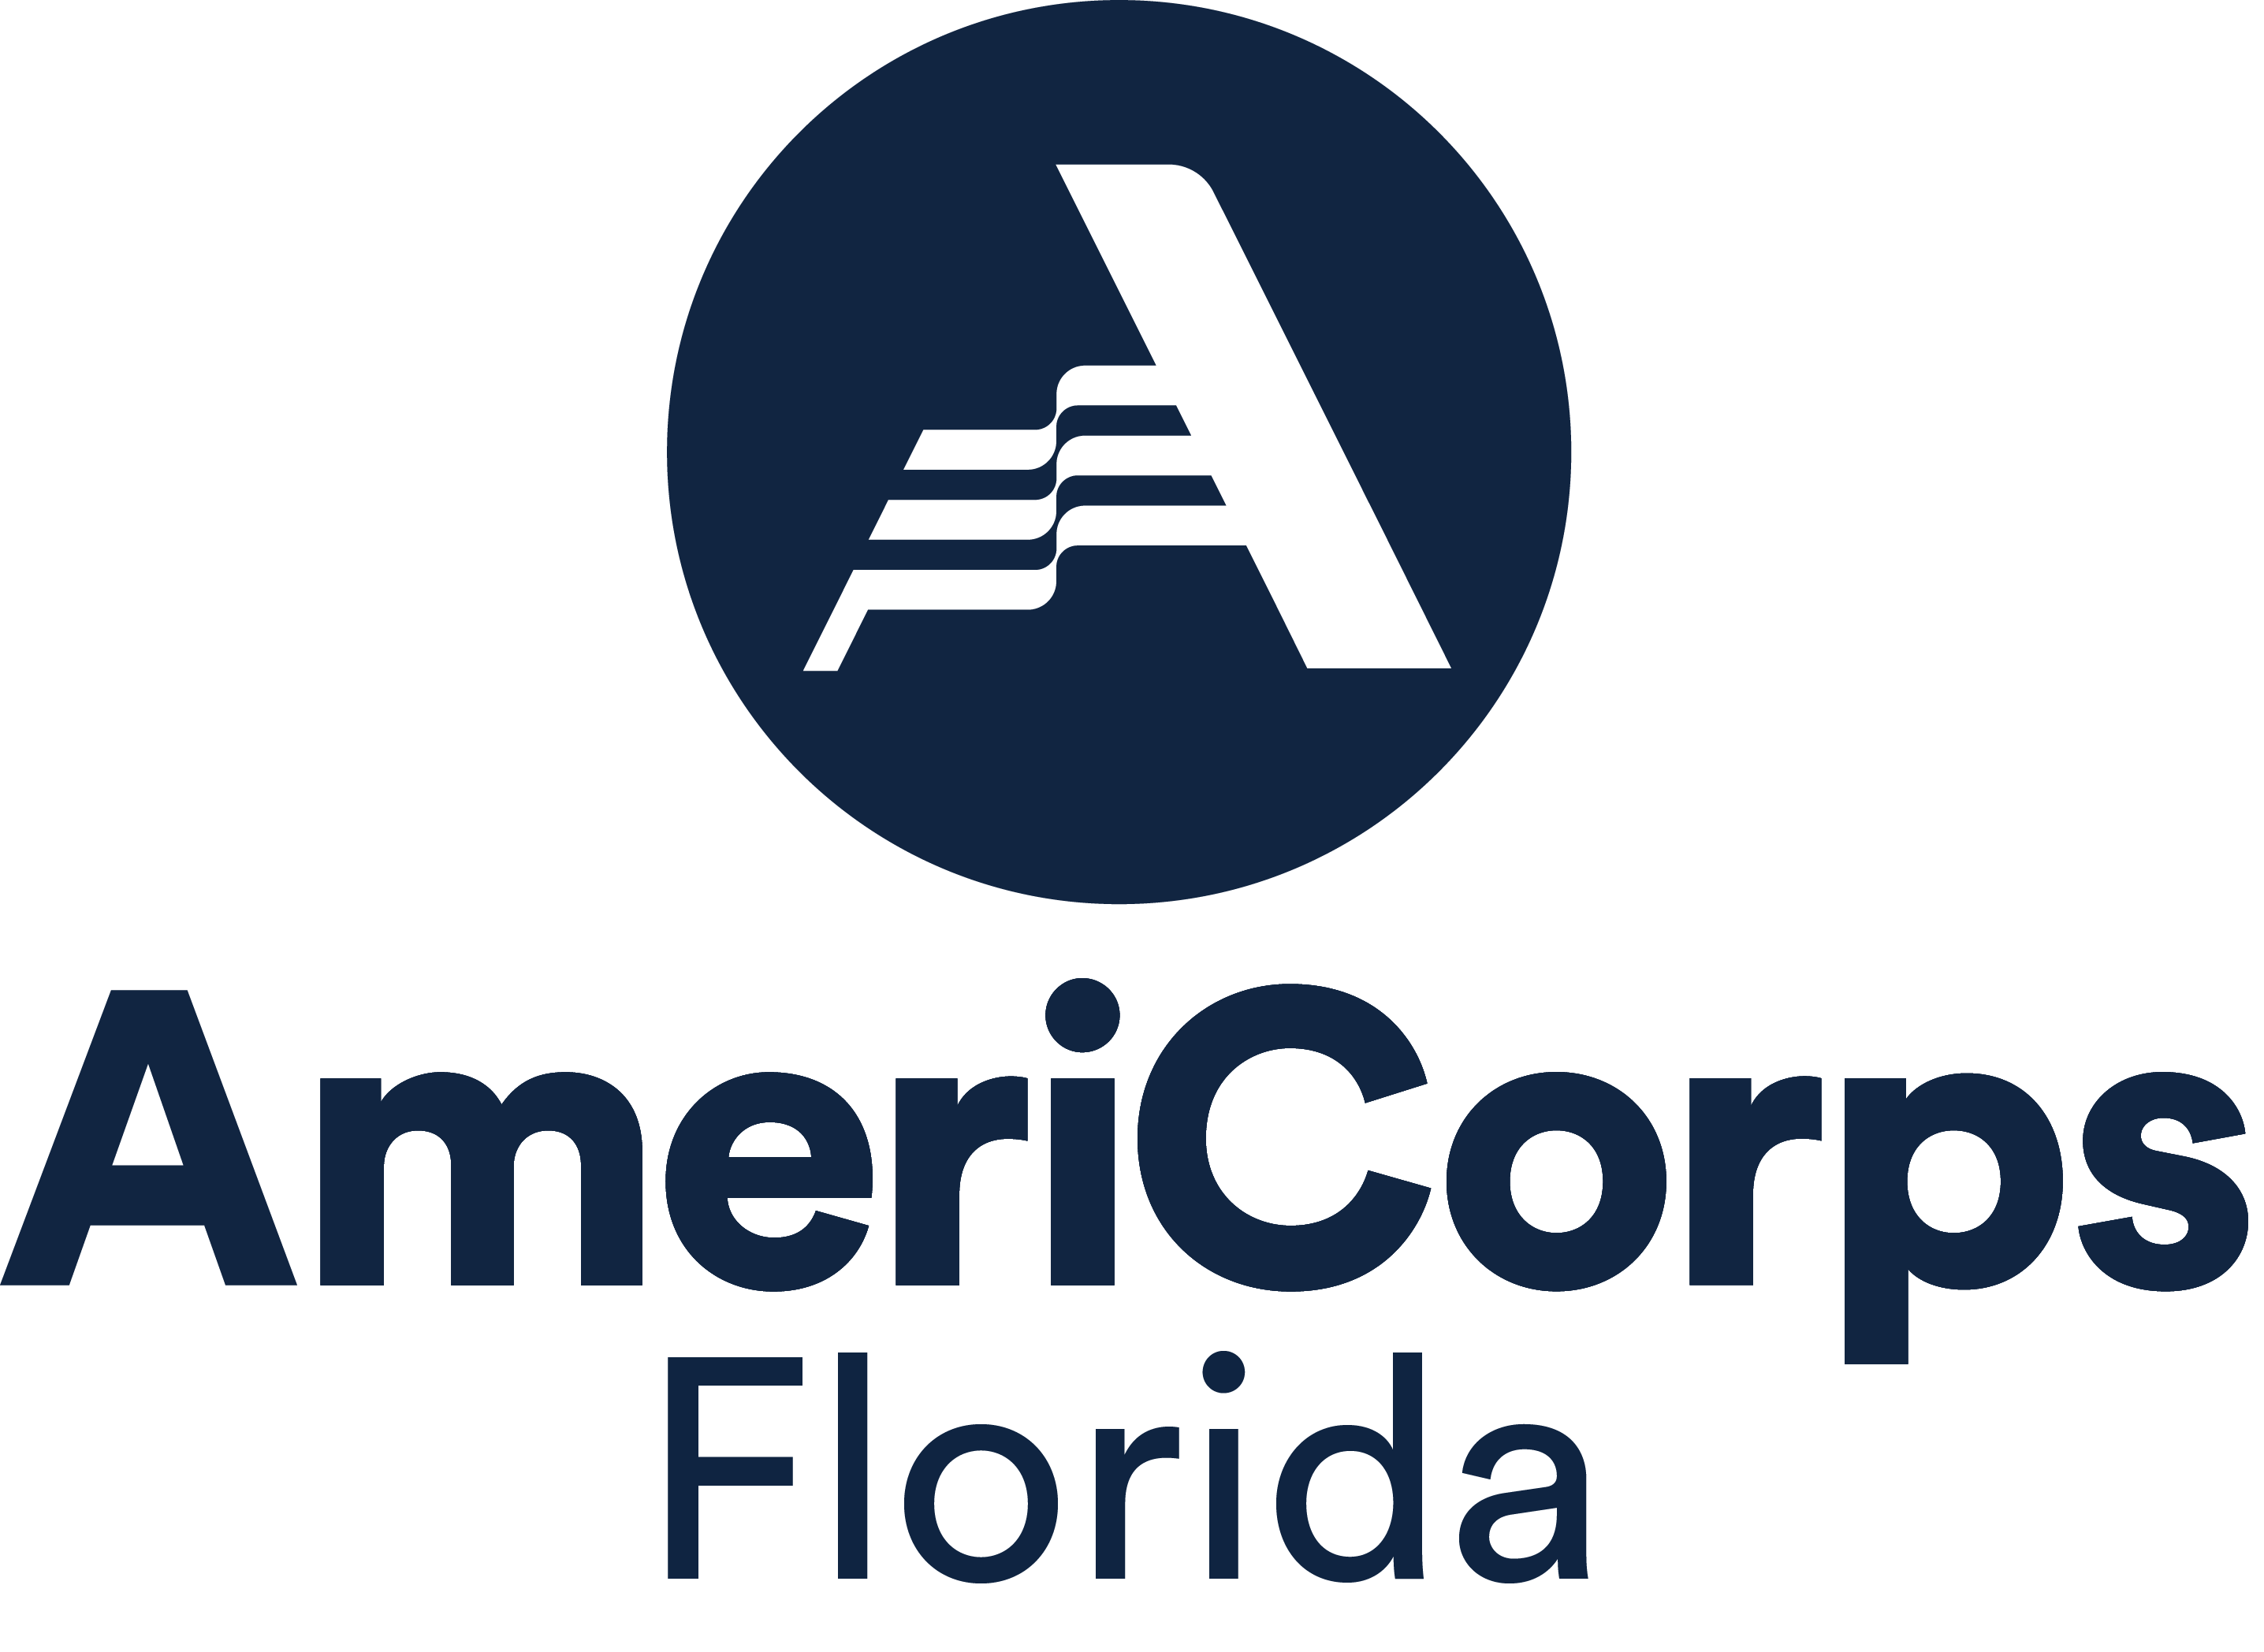 AmeriCorps-Florida-Navy-Vertical_PNG_1.png (2872×2096)